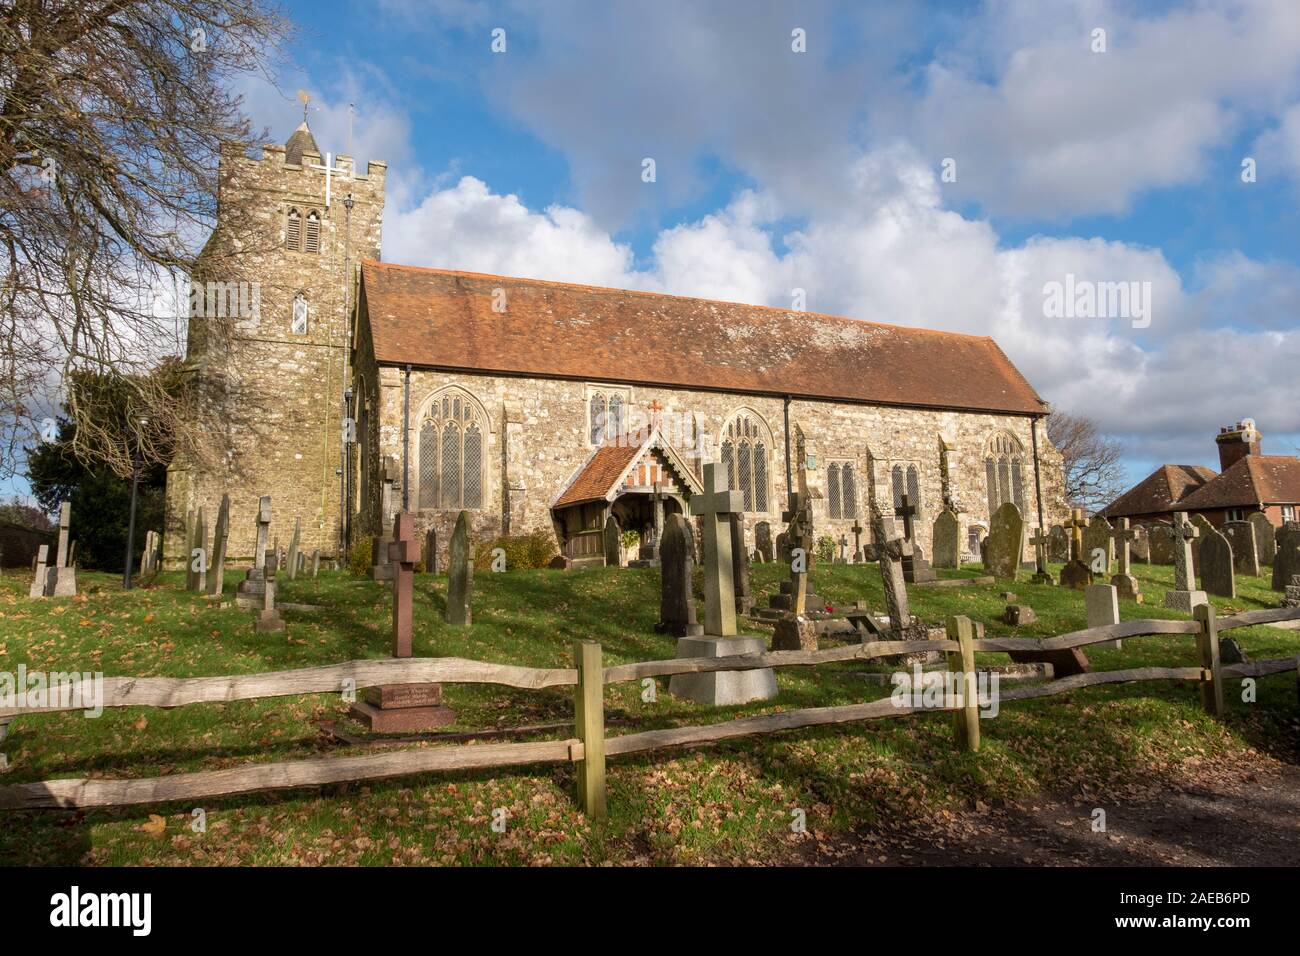 St George's Church, Heyd, East Sussex, UK Banque D'Images